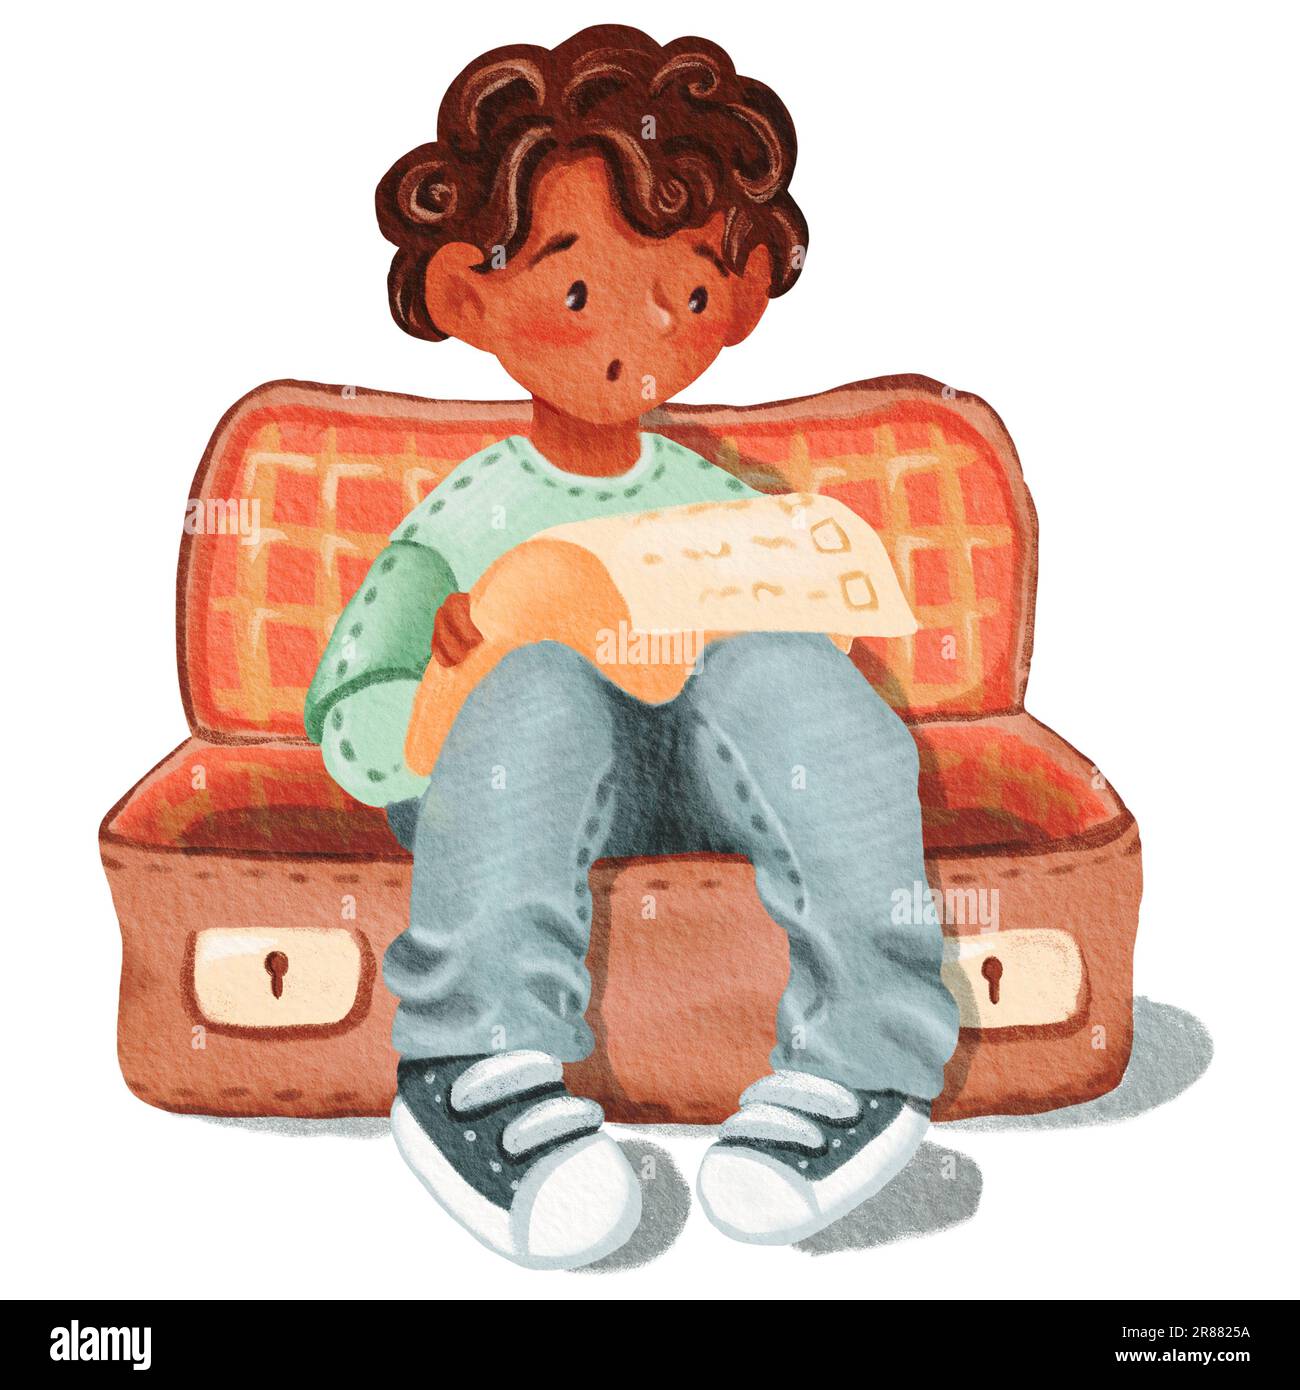 A dark-skinned boy sits in open empty brown retro suitcase. Surprised looks at the todolist. Isolated watercolor illustration of a teenager. Character Stock Photo